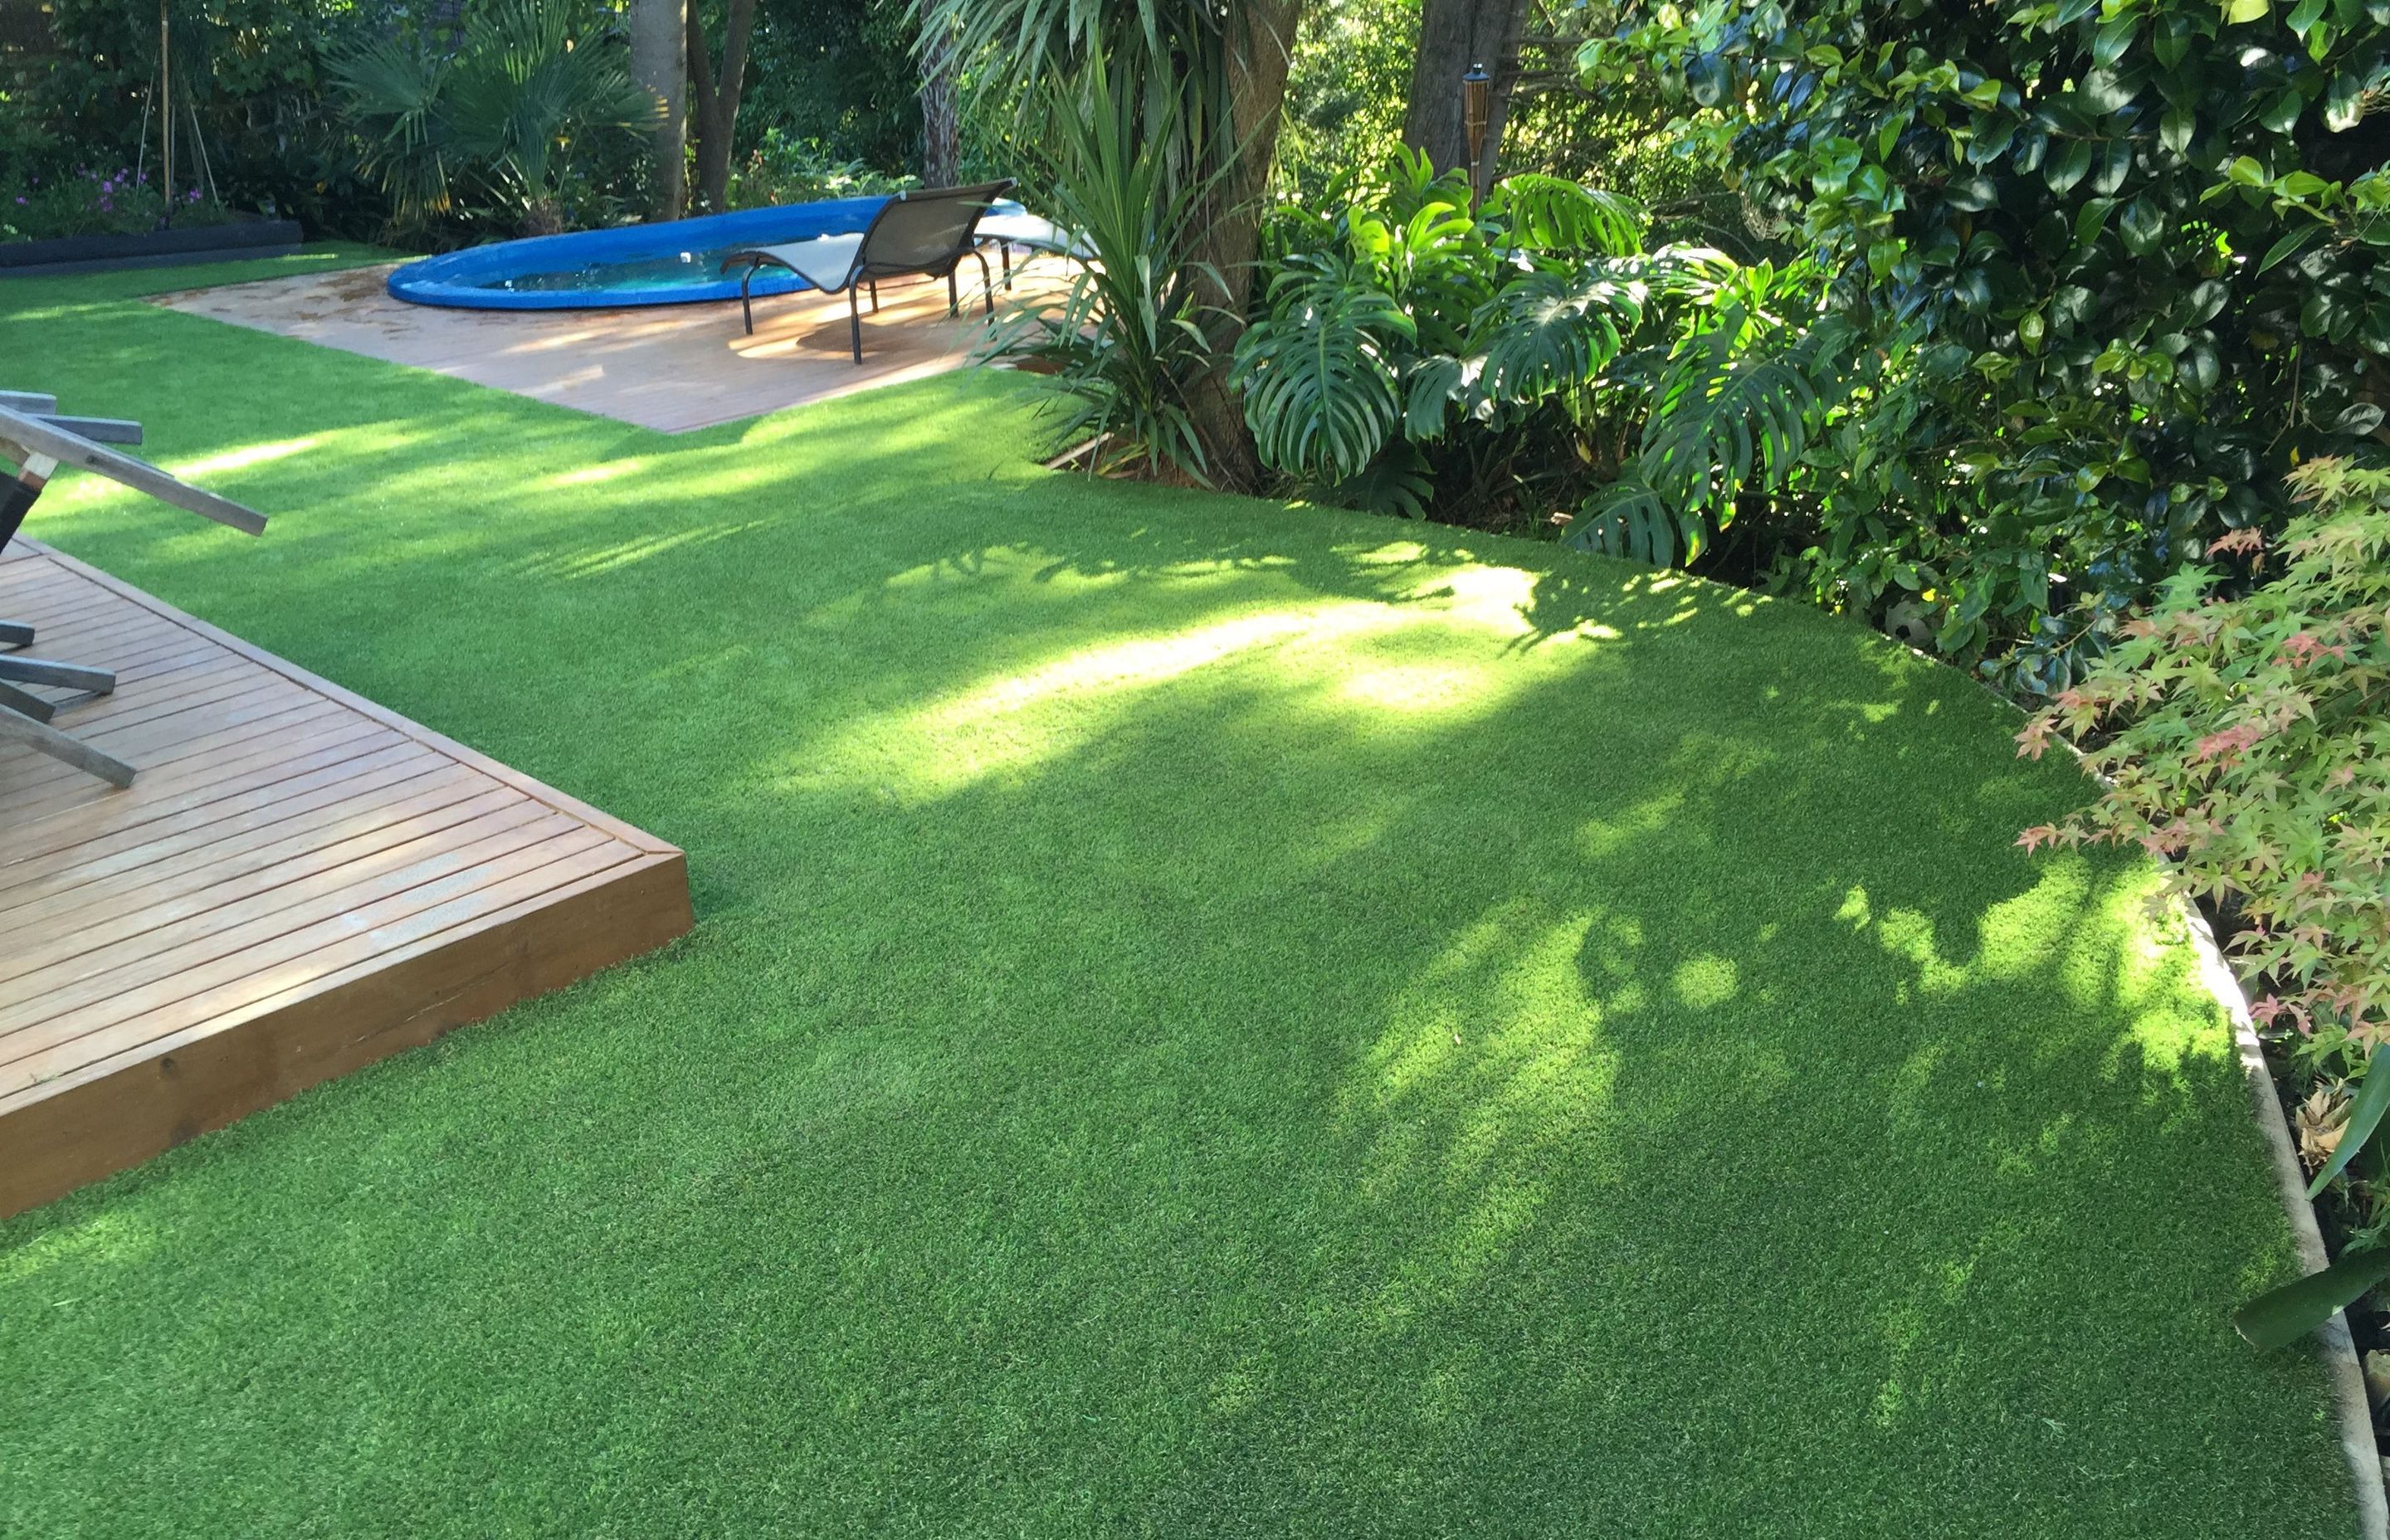 Enjoy your lawn winter and summer with Eco Lawn's ranges.